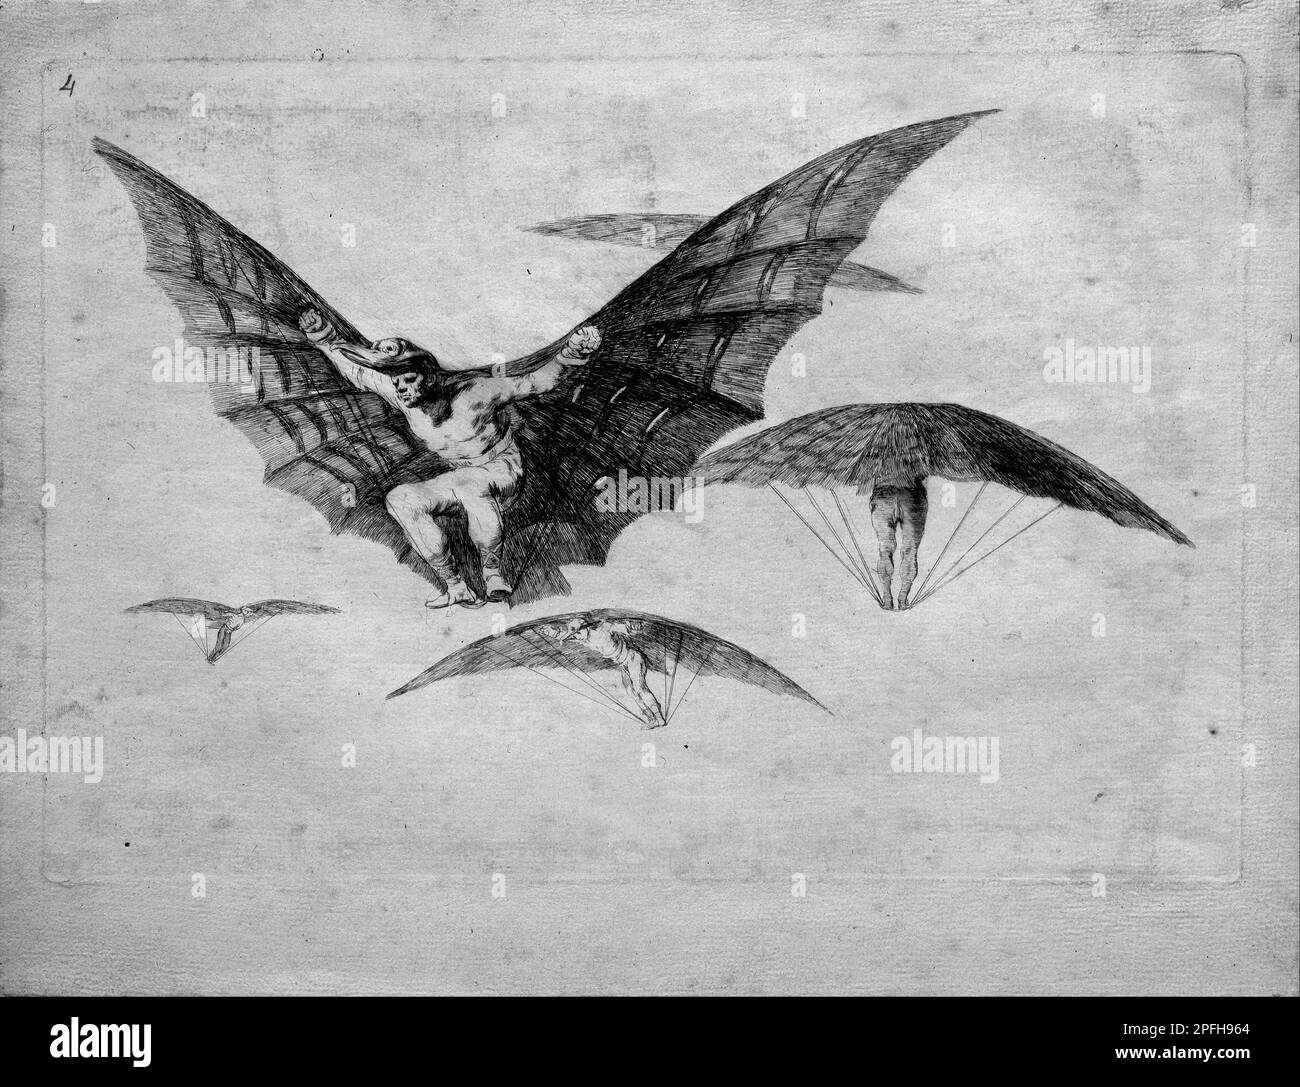 A Way of Flying (1815 - 1819) by Francisco de Goya y Lucientes Stock Photo